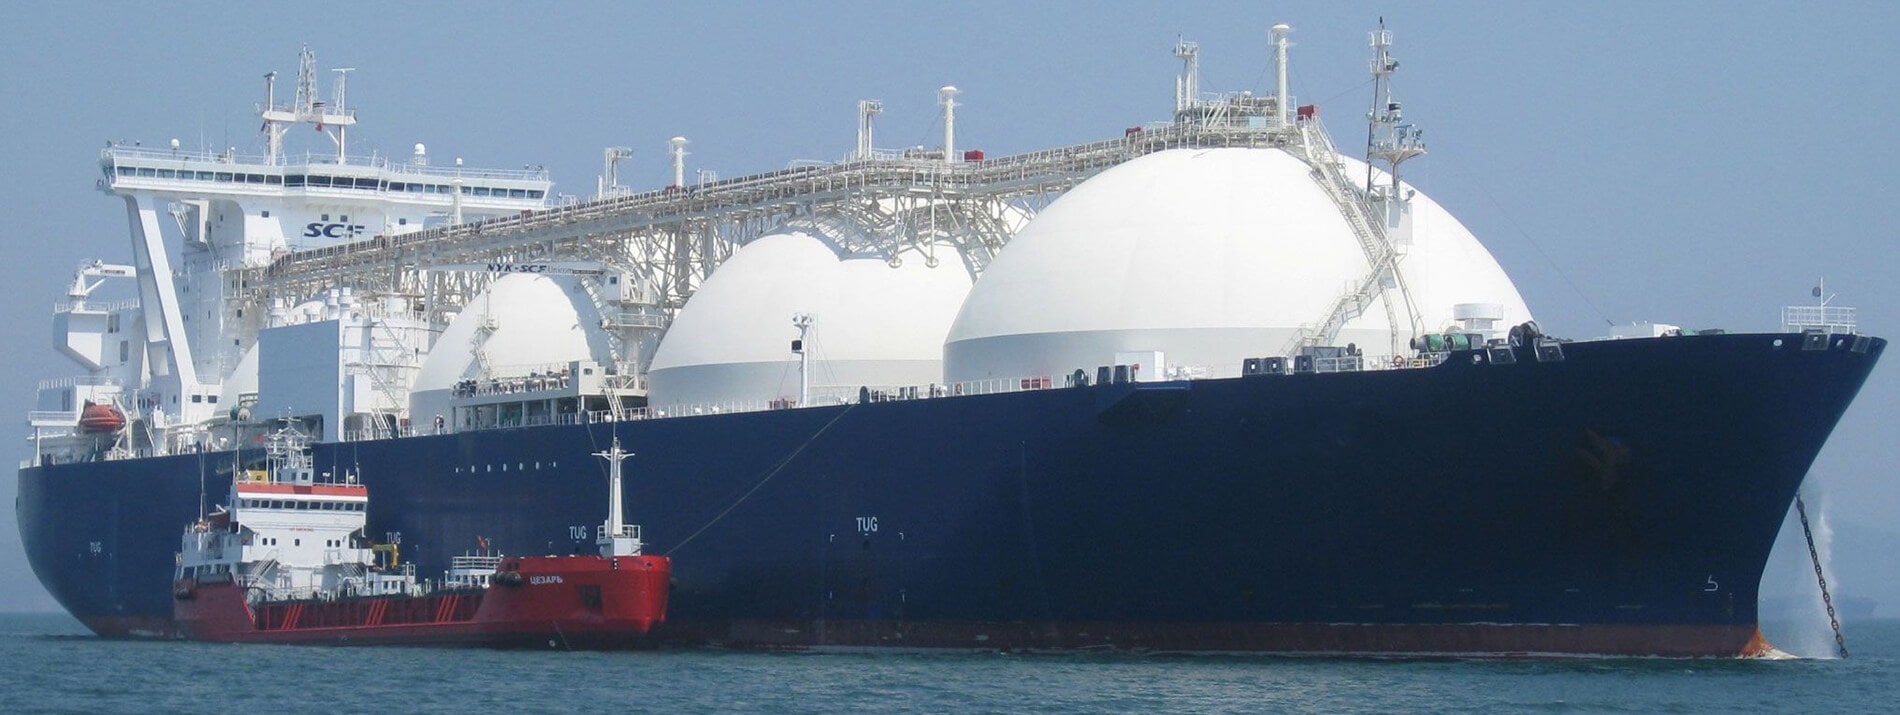 Another large Liquid Natural Gas (LNG) Carrier with adjacent red tug and a ship loan